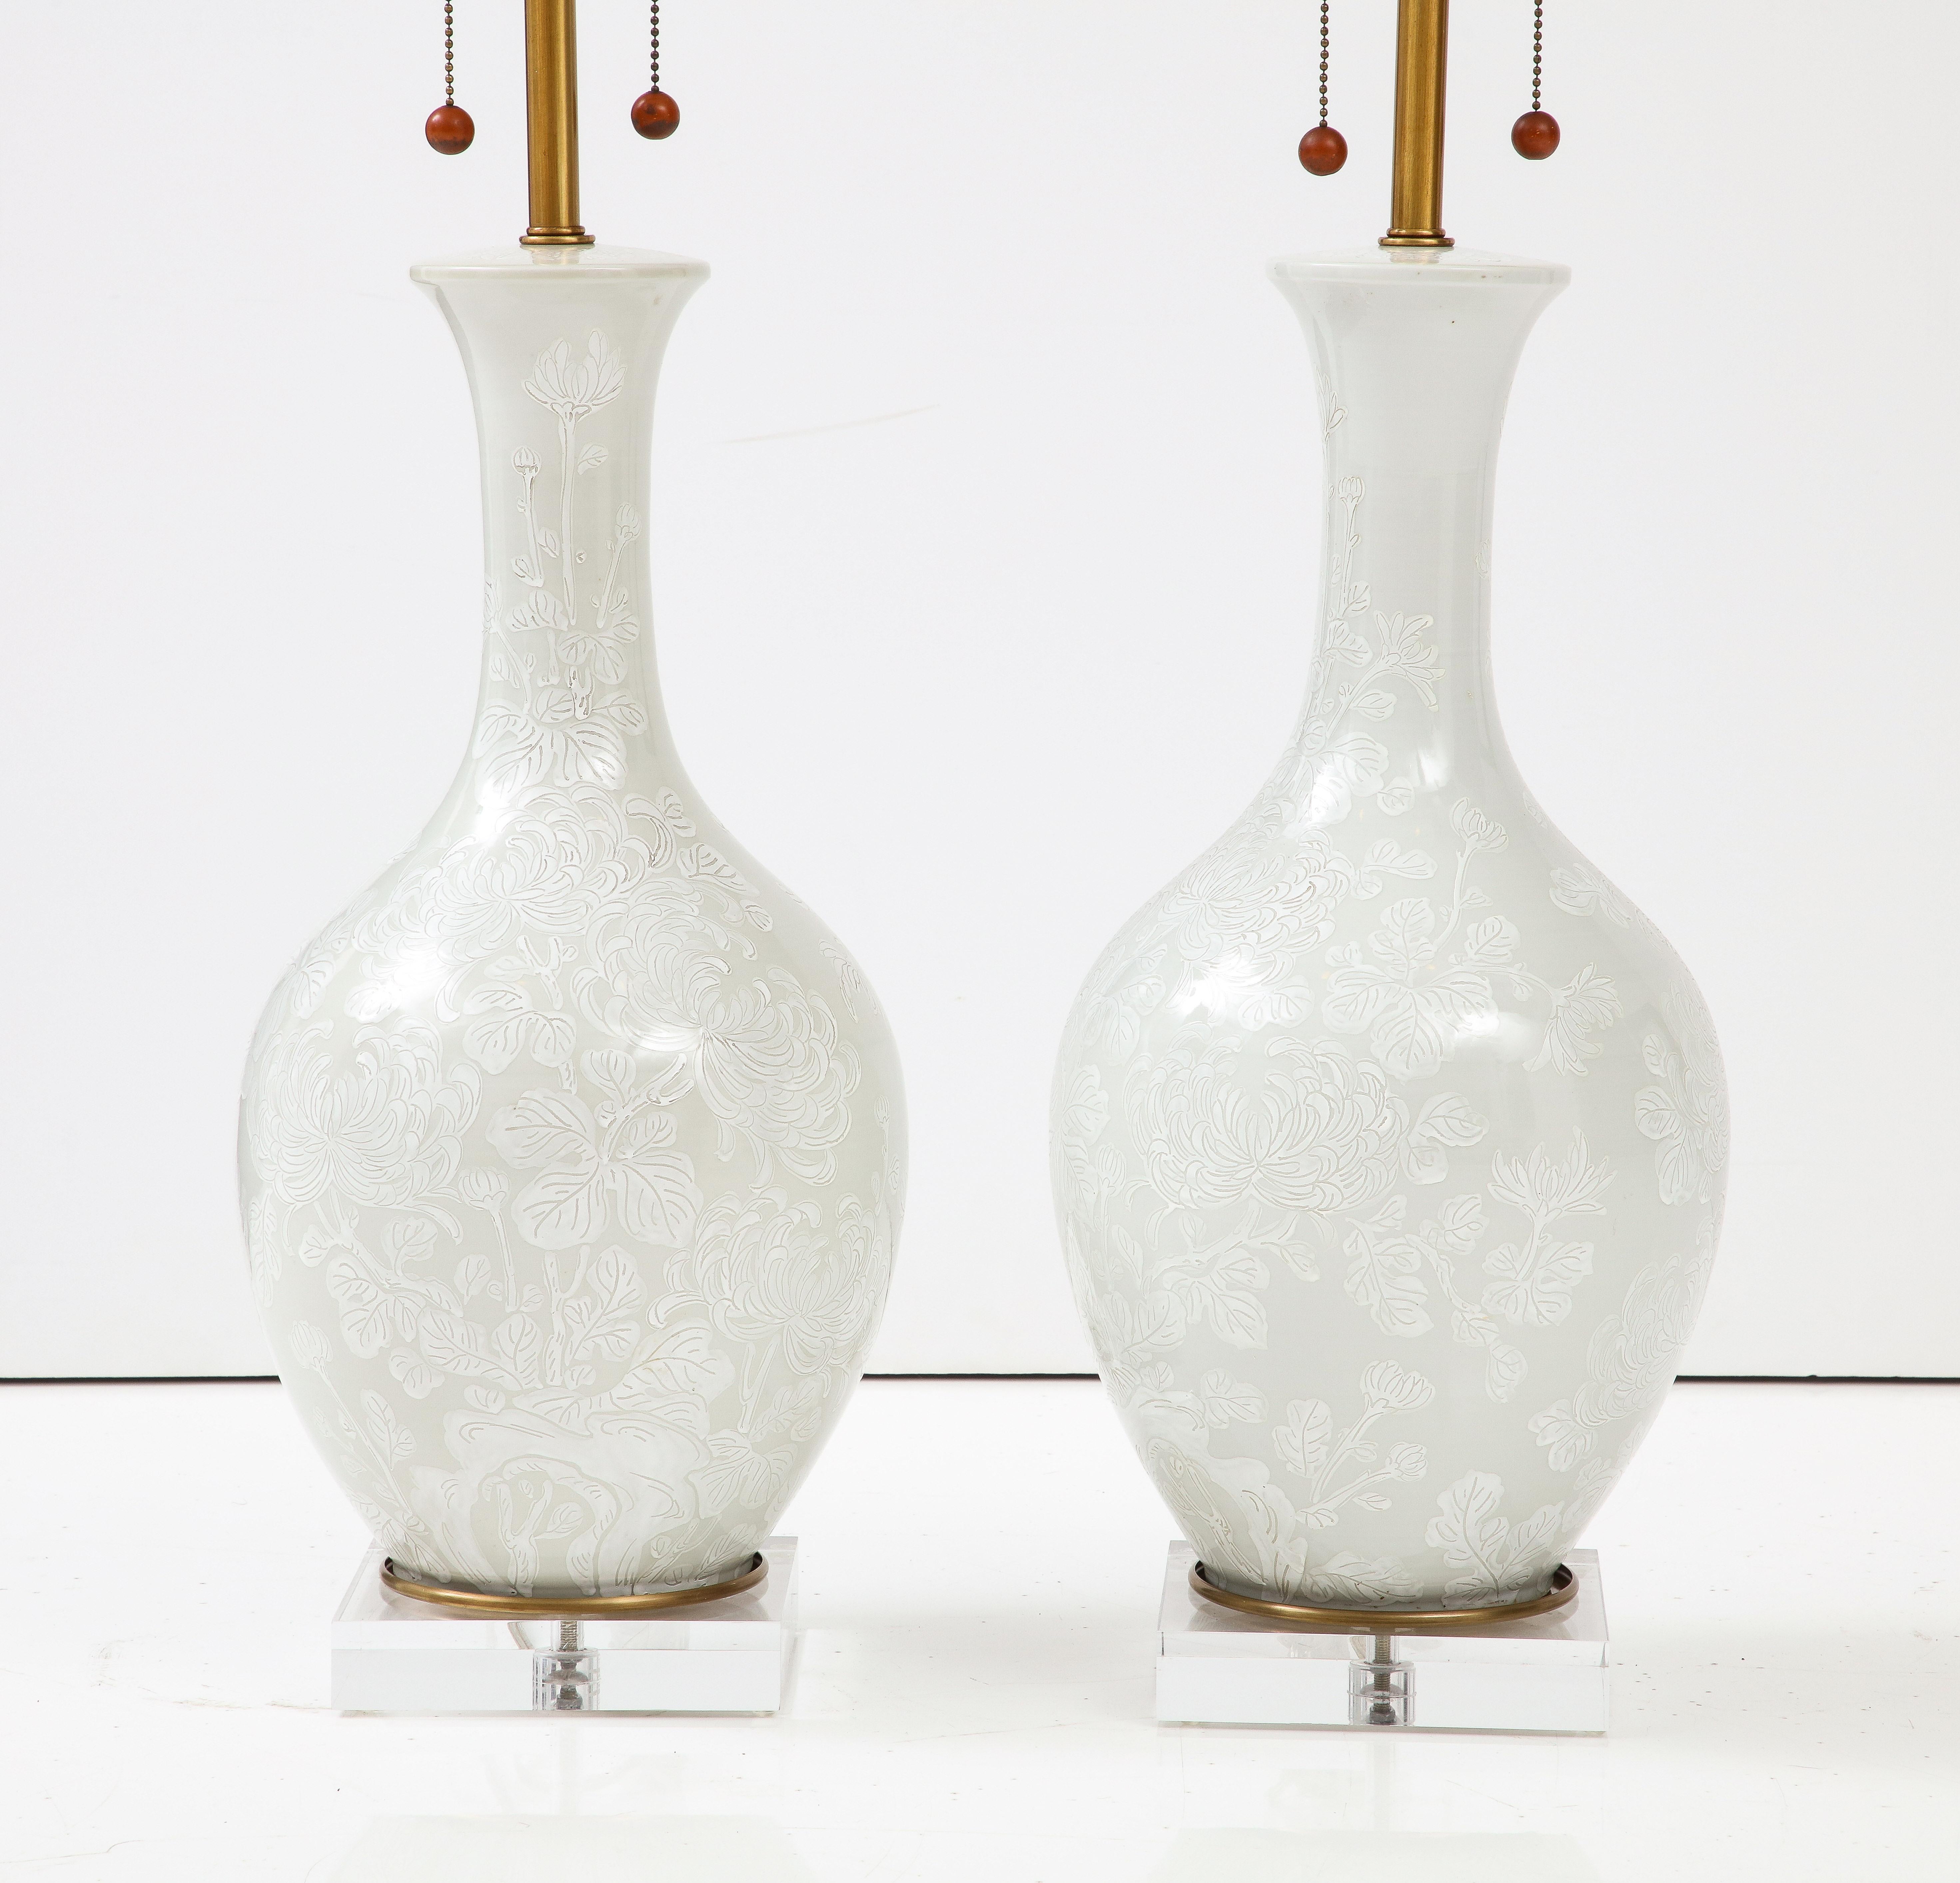 Mid Century porcelain lamps in an ivory white glaze embellished with white chrysanthemum pattern, resting on custom lucite bases. Double pull chains have been rewired, 100W bulb max. Marbro Lamp Co. 100W max bulbs.